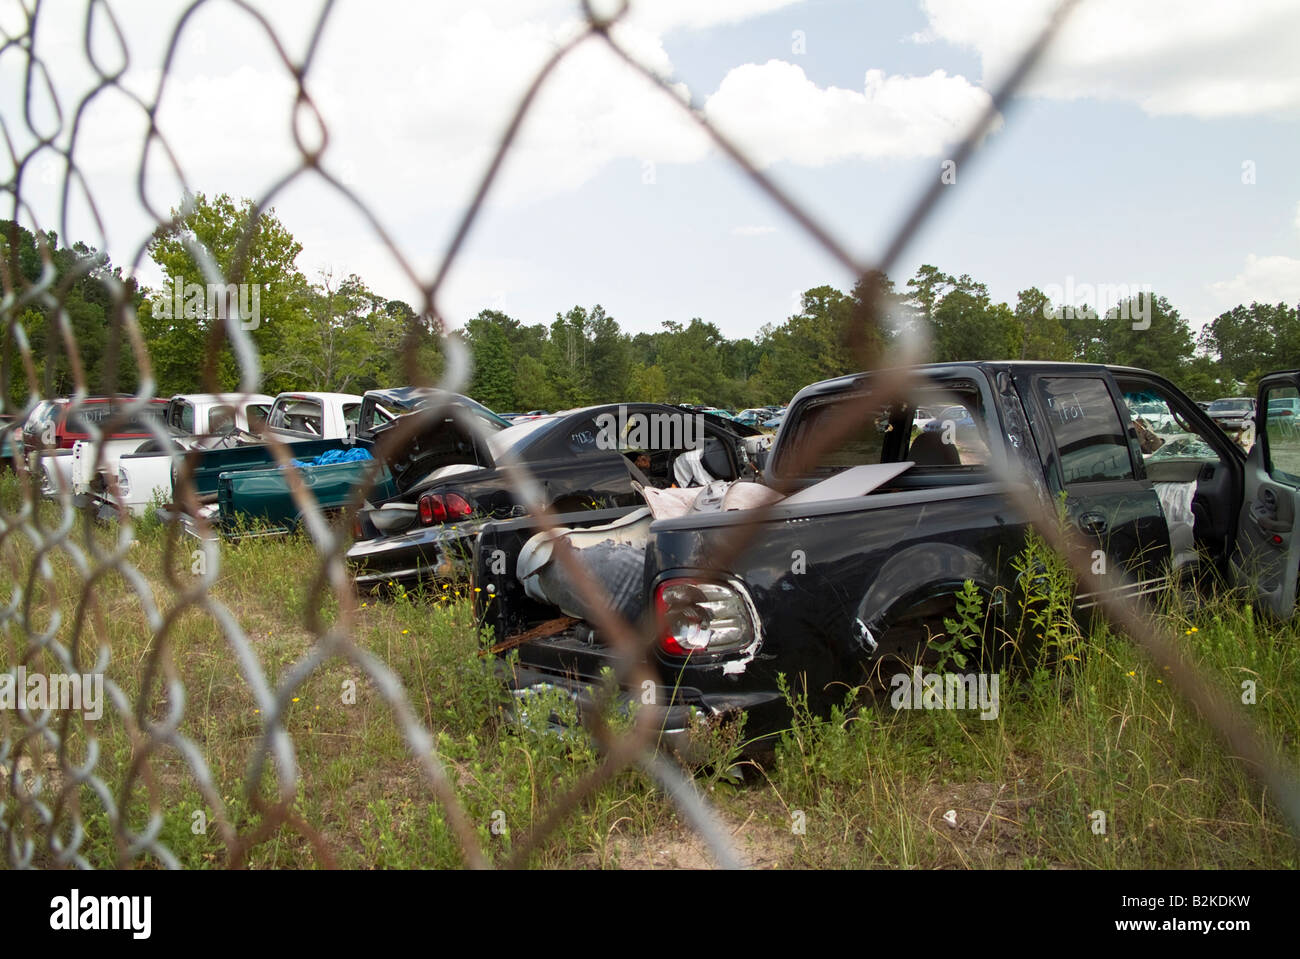 A row of wrecked or scrapped vehicles taken from behind a fence Stock Photo